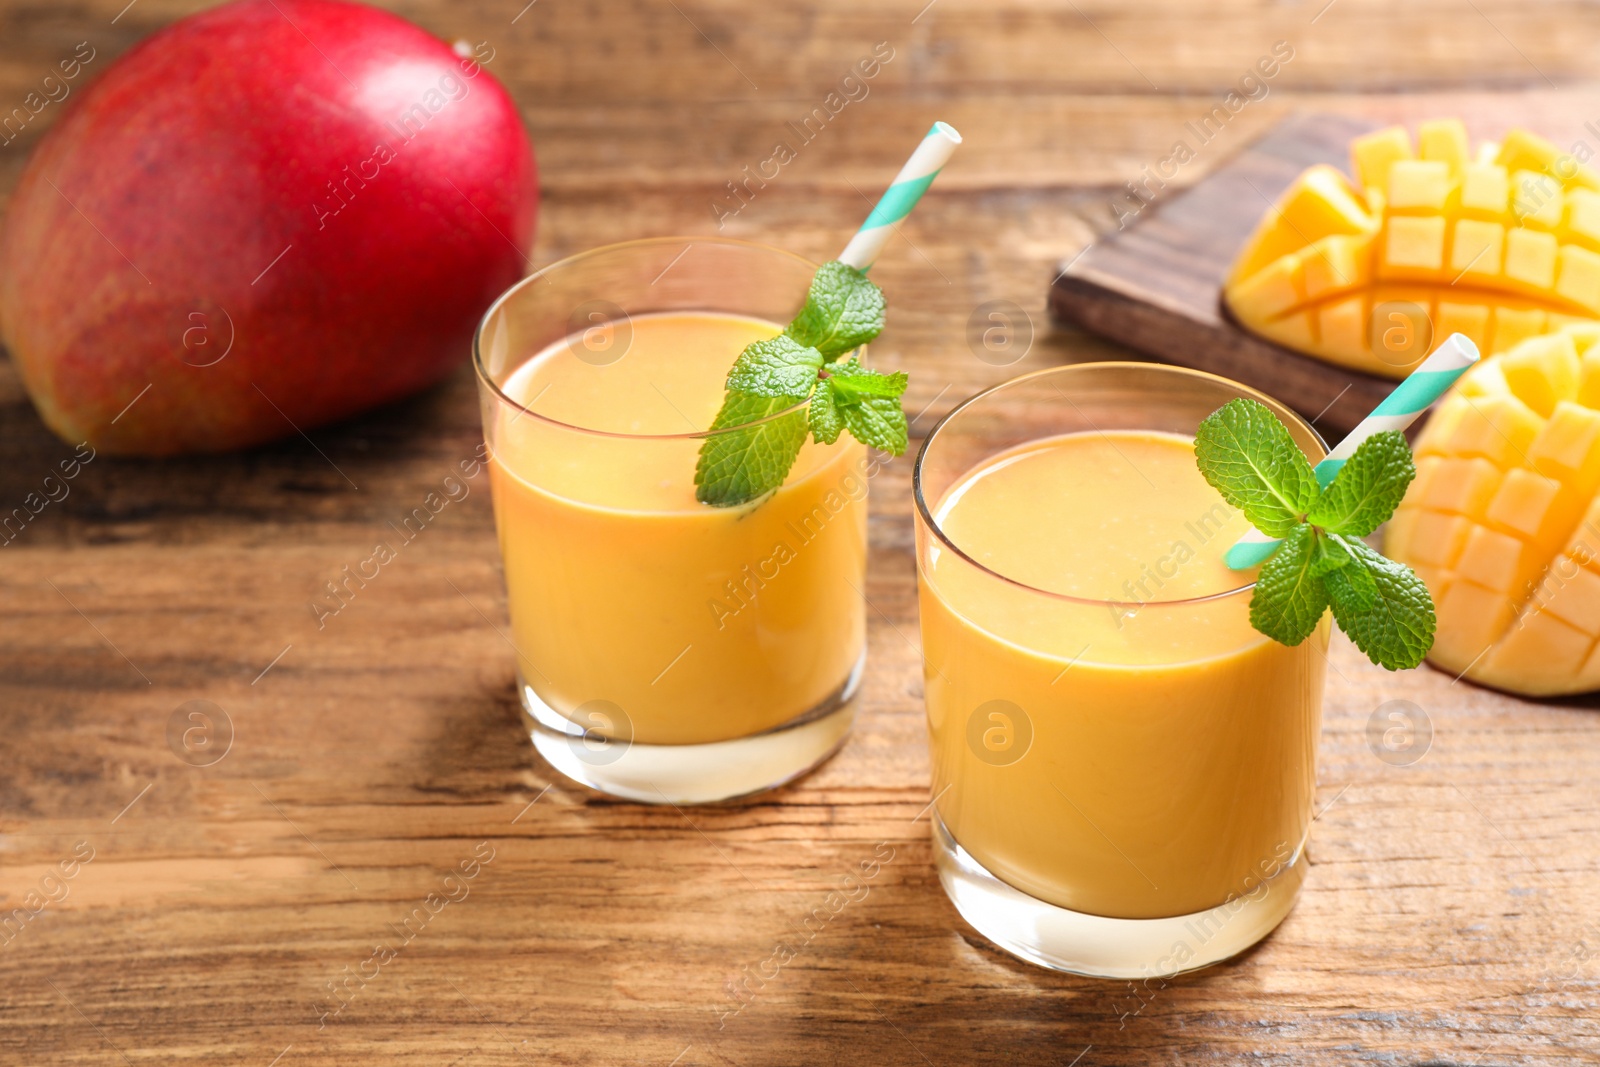 Photo of Fresh delicious mango drink on wooden table